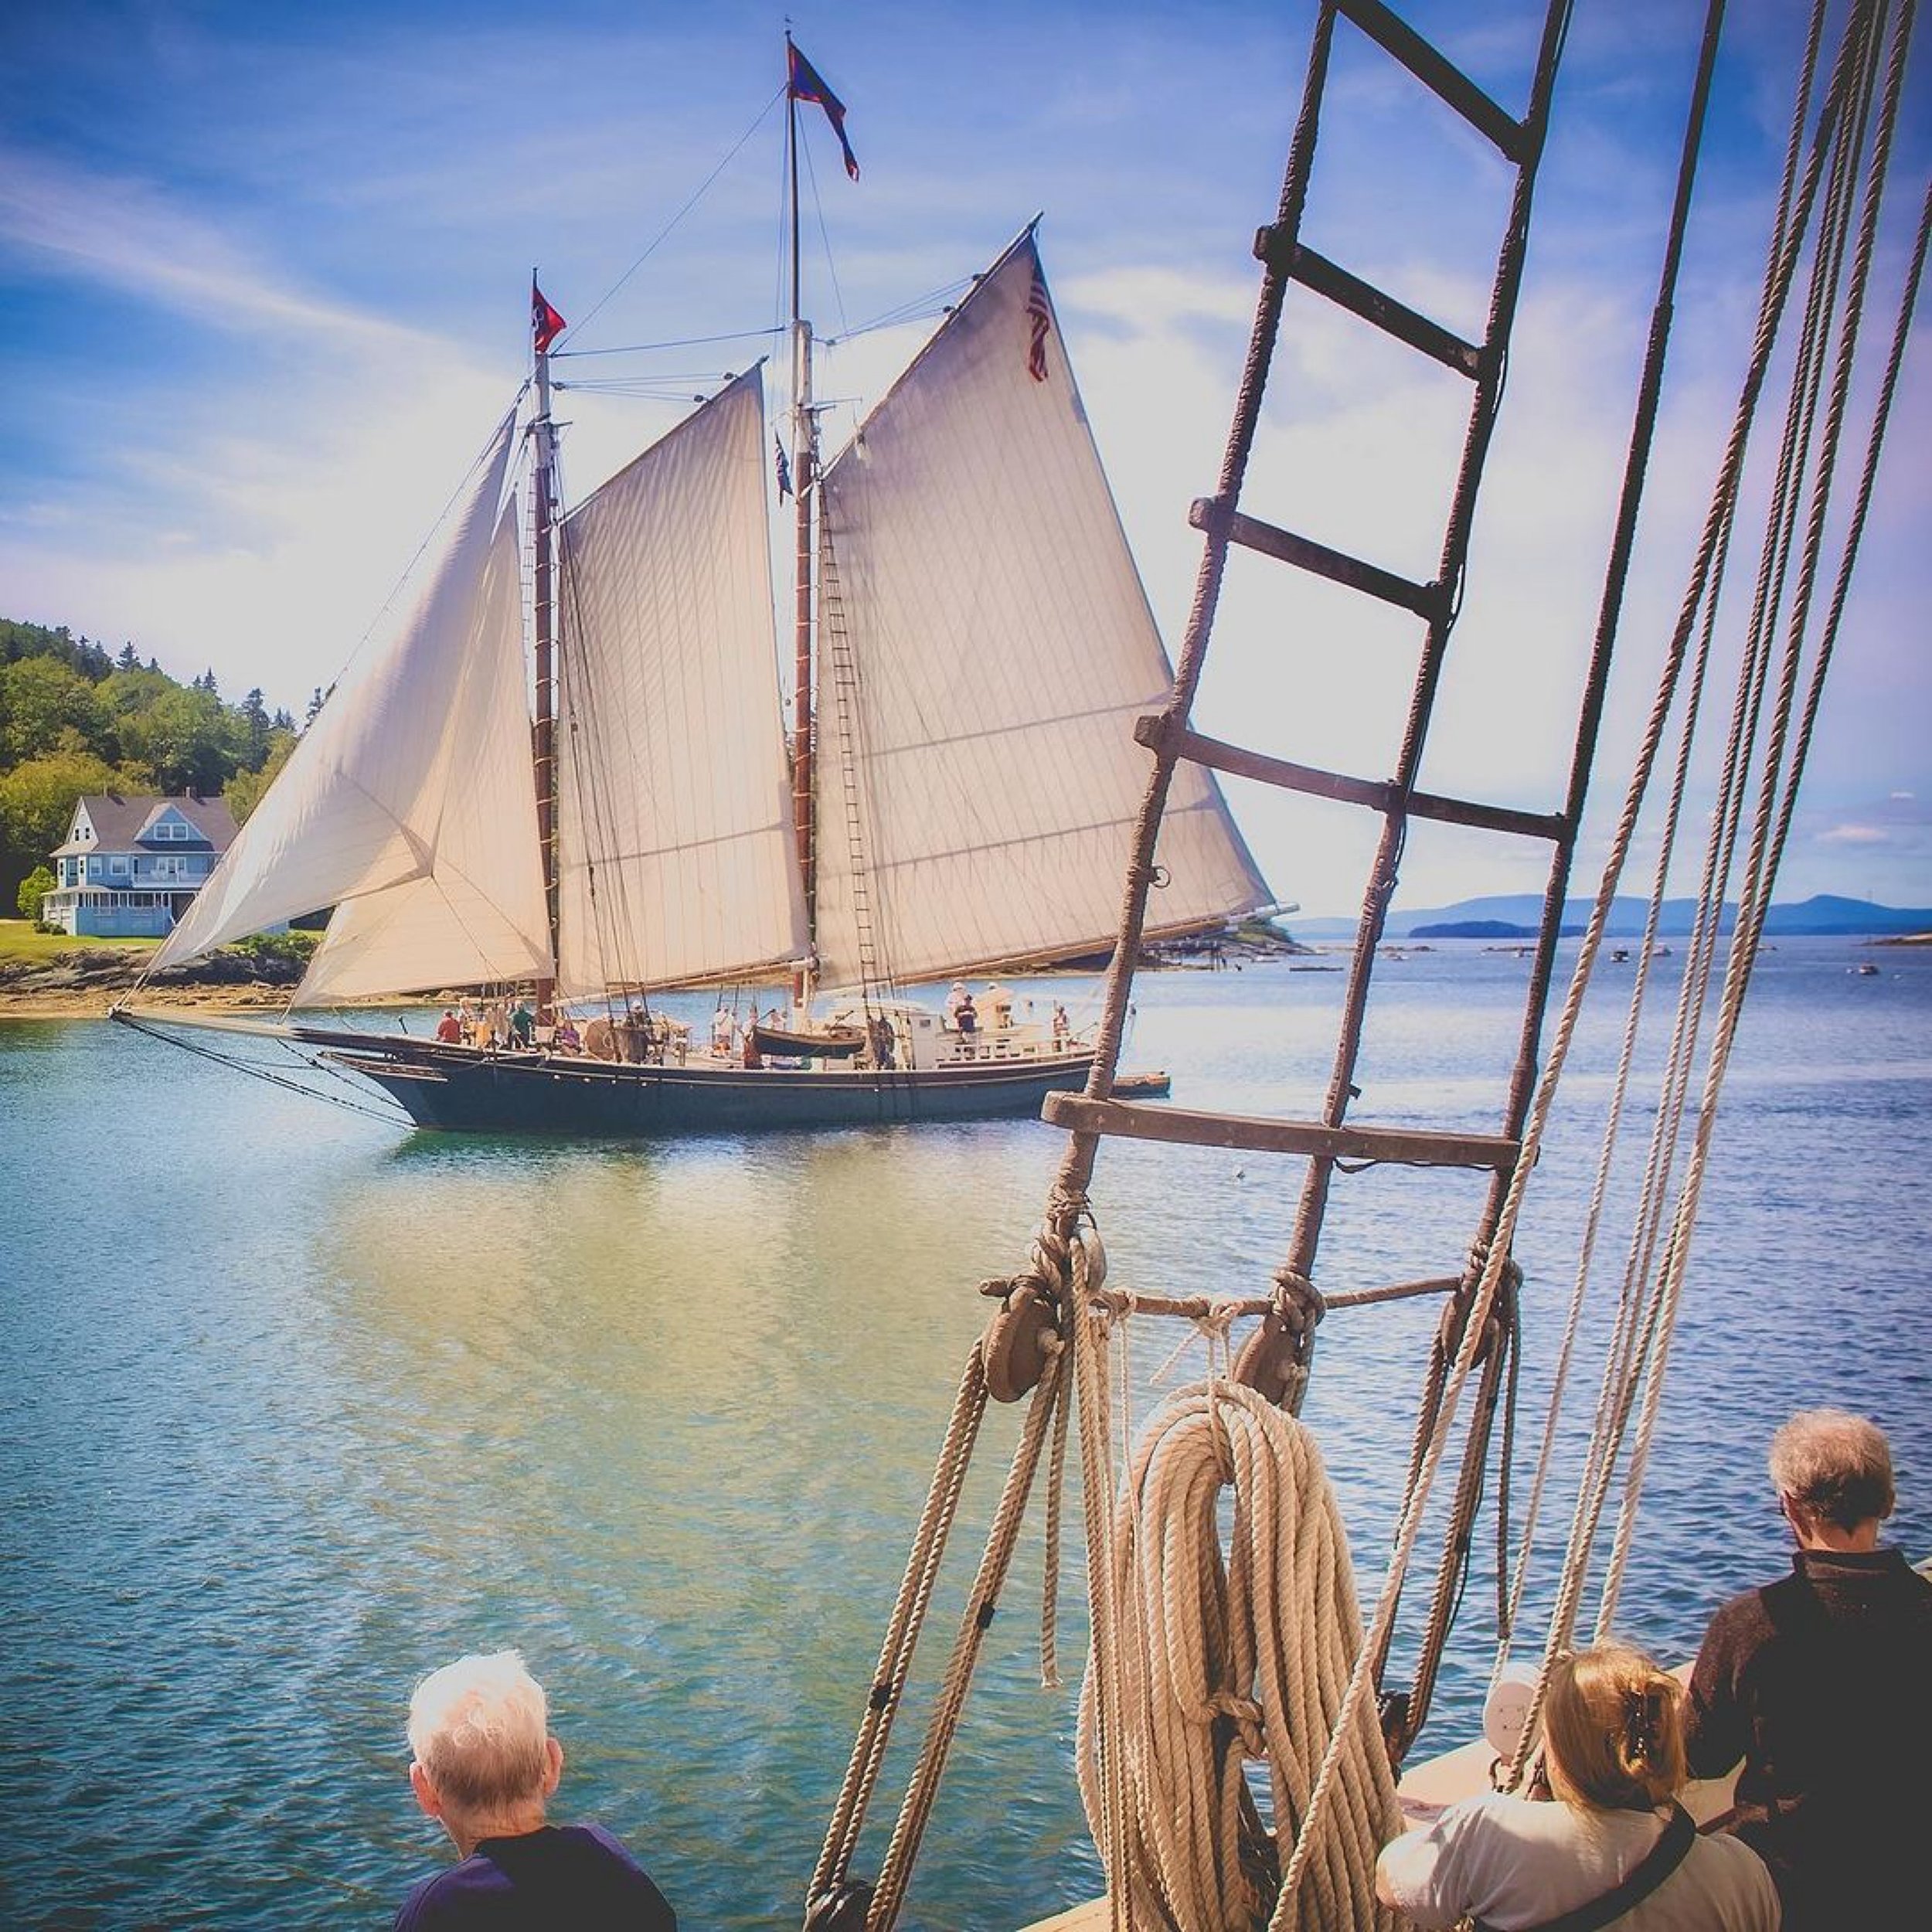 #Repost @theschoonerstephentaber
・・・
Where&rsquo;s the best place to see the Eiffel Tower from?

Not from the Eiffel Tower, we know that much. 

The same is true of our wonderful schooner. The only time we are jealous of other schooners, is when they